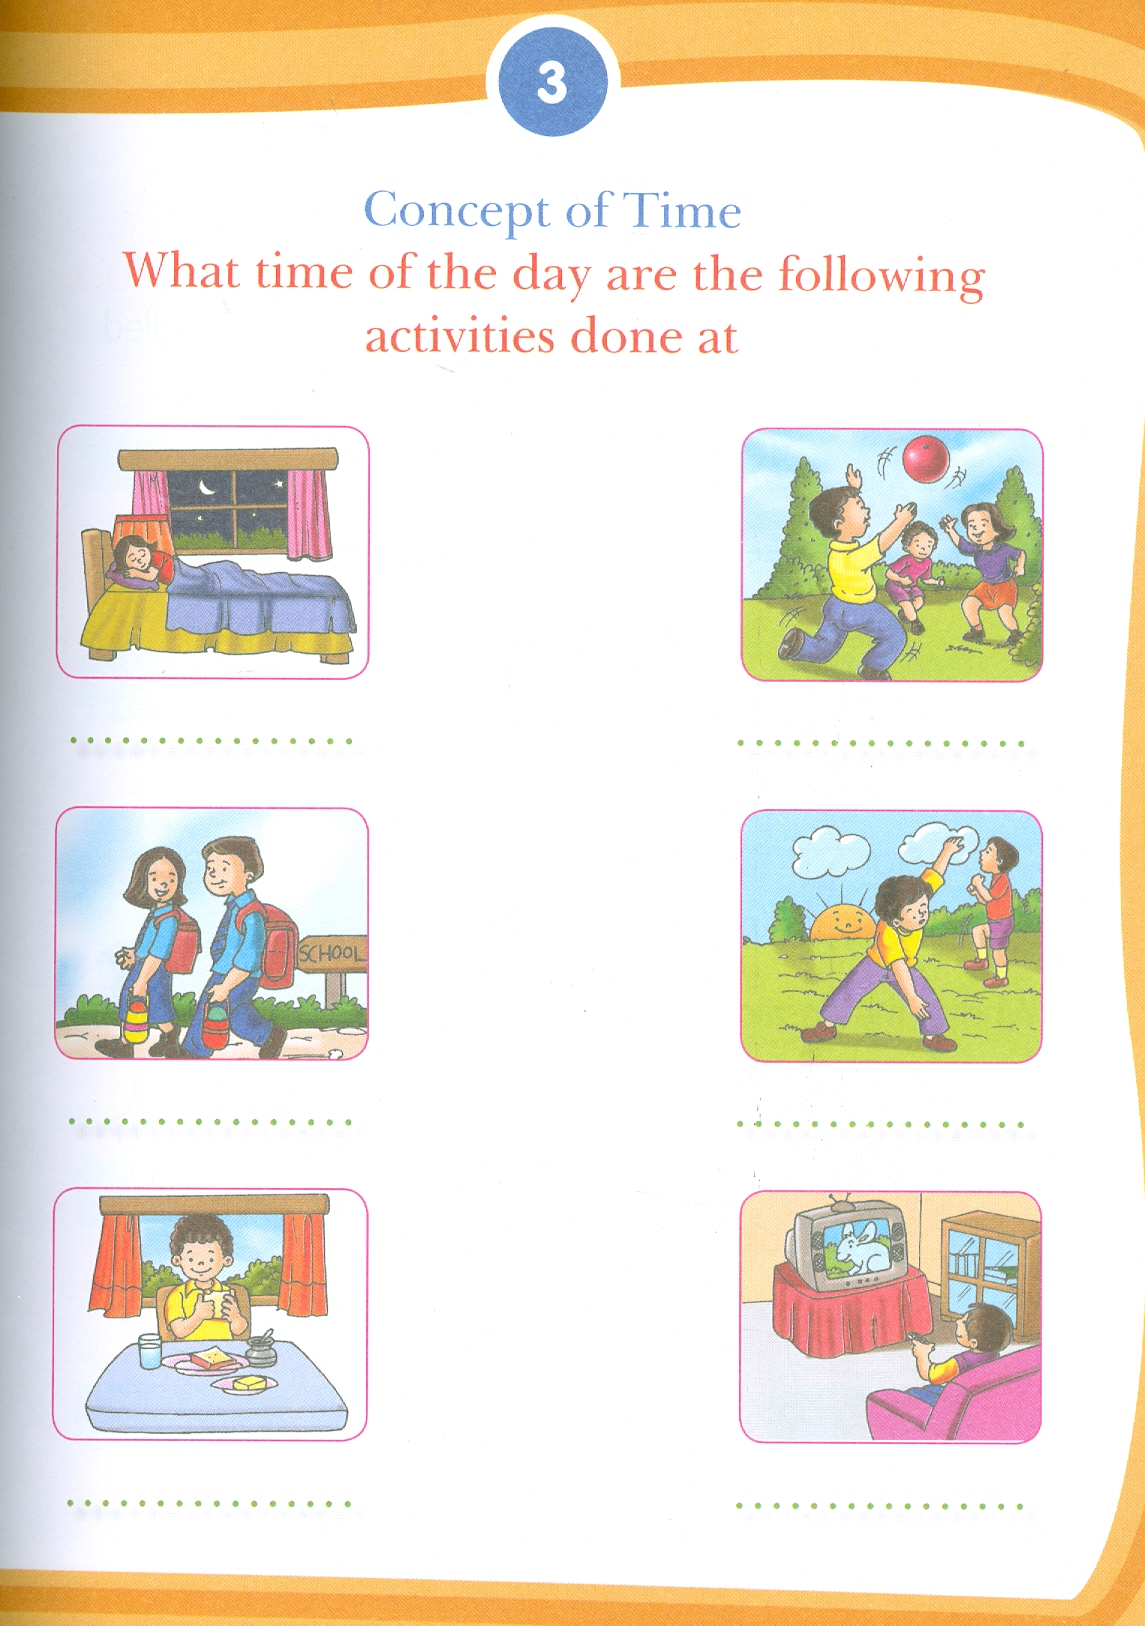 Kid's 4th Activity Book General Knowledge - Age 6+(Know Your Awareness) (Các Hoạt Động Kiến Thức Chung Cho Trẻ 6+)